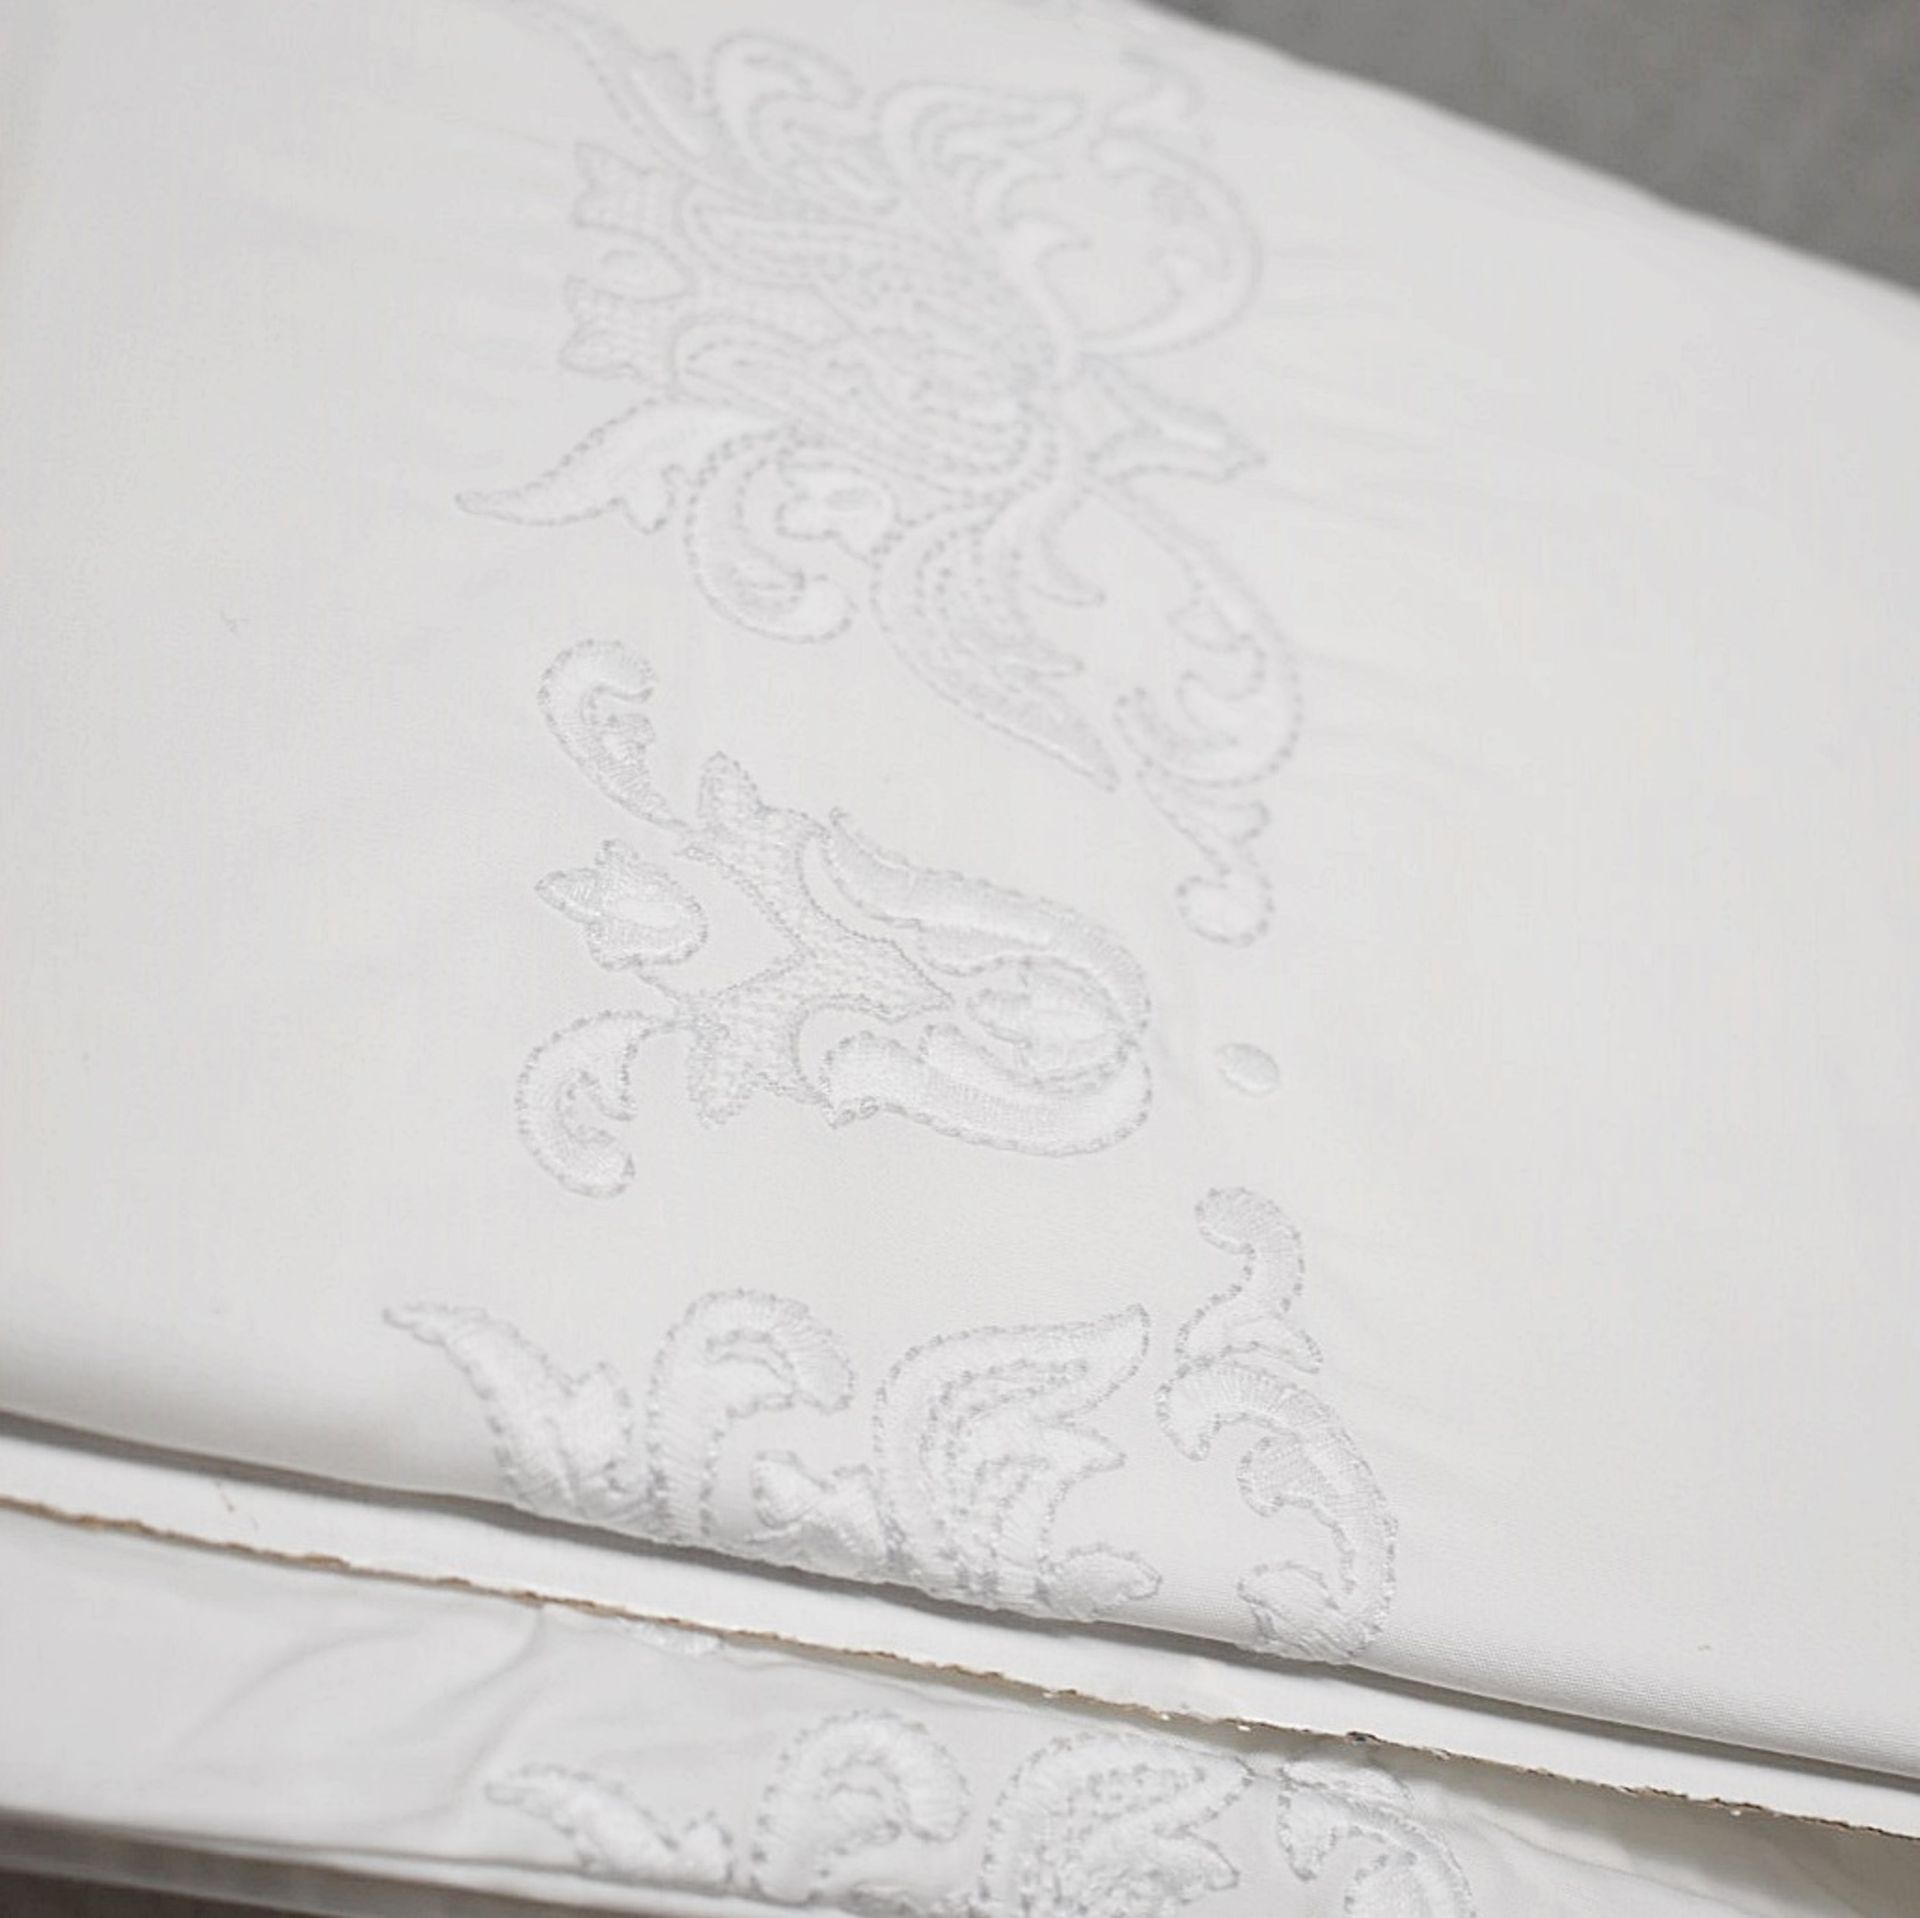 1 x YVES DELORME 'Muse' Luxury King Duvet Cover (240cm x 220cm) - Original Price £449.00 - Image 5 of 7